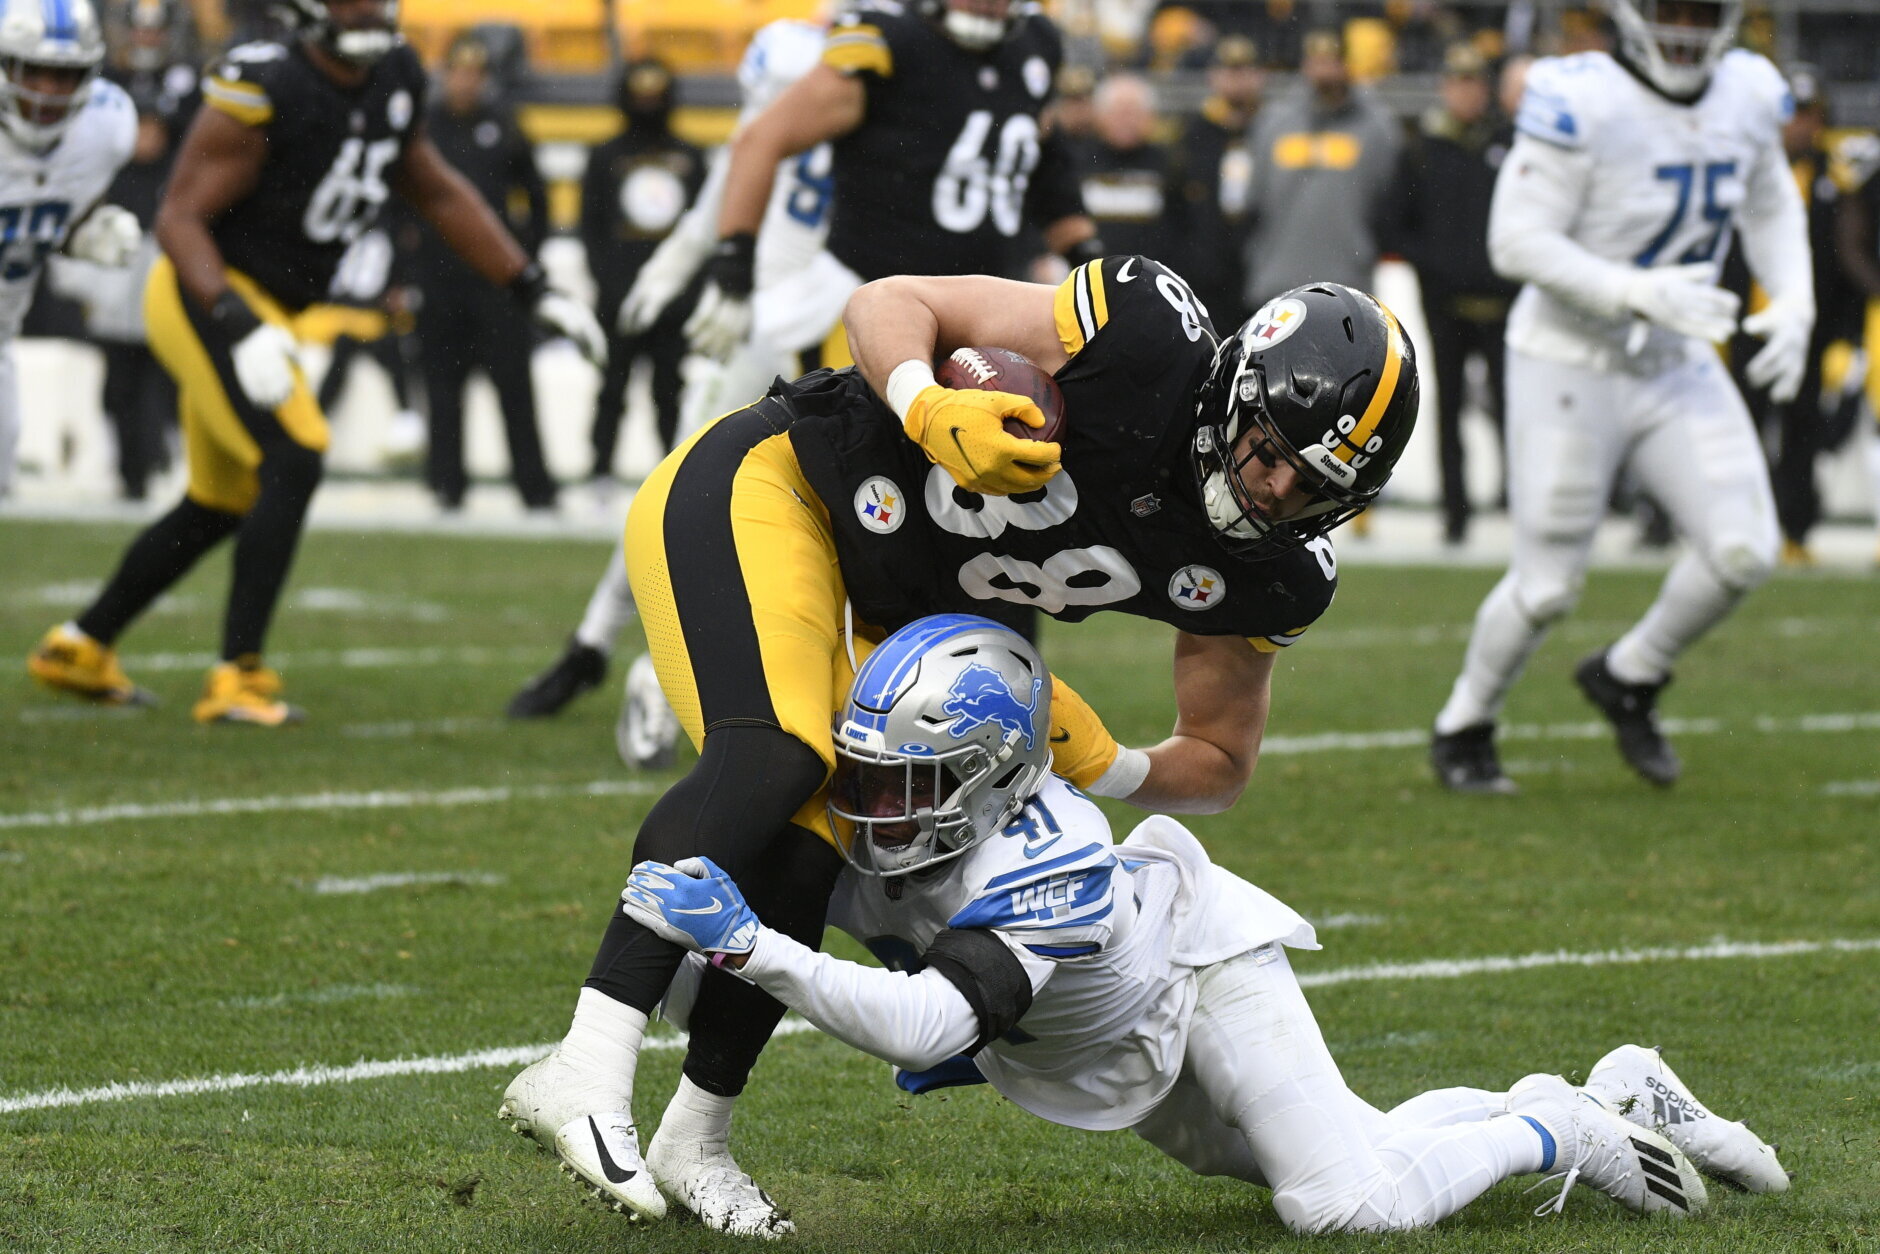 <p><b><i>Lions 16</i></b><br />
<b><i>Steelers 16 (OT)</i></b></p>
<p><a href="https://wtop.com/news/2012/11/nfl-week-10-recap-tie-game-travesty/" target="_blank" rel="noopener">I&#8217;ve ranted for years about how much I hate ties</a> — the worst result in football — so I&#8217;ll instead point out that Detroit officially won&#8217;t go 0-17 this season.</p>
